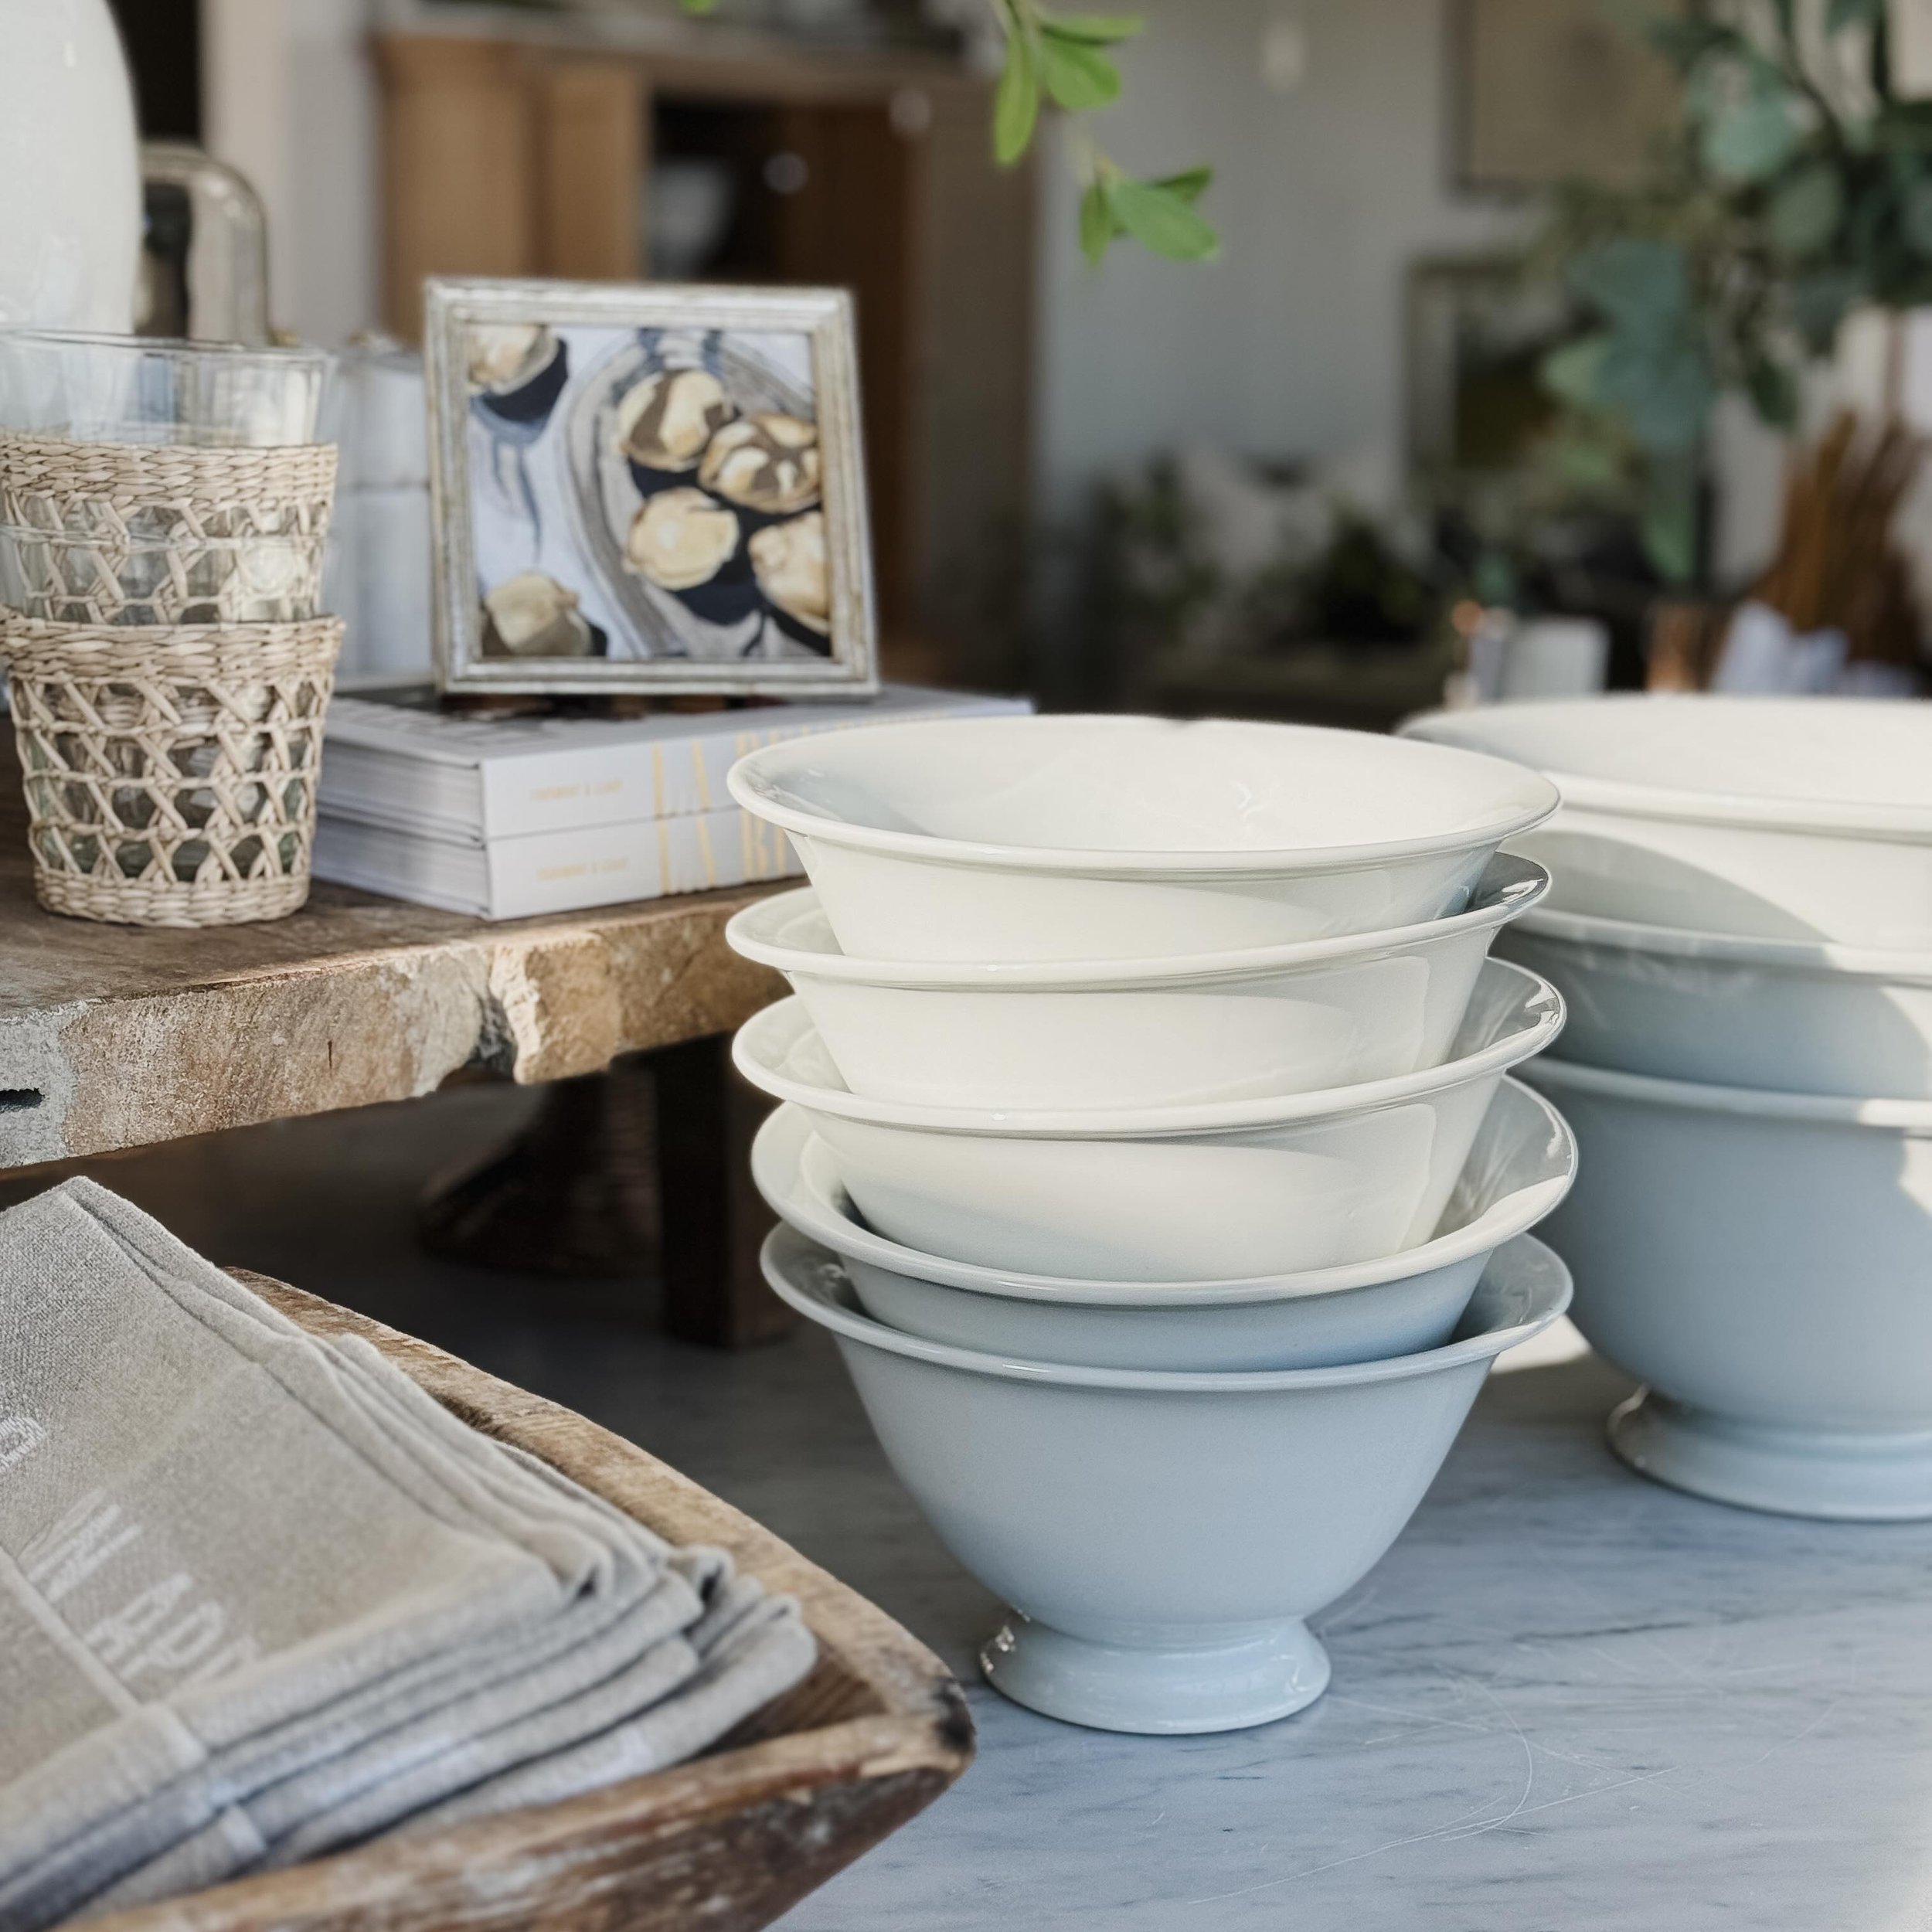 These beautiful ironstone pedestal bowls are one of my most favorite things I found at Round Top! Made in the good ol&rsquo; USA🇺🇸 in the early 1900&rsquo;s!
Come by our shop in St. George and see all the pretty things!! 
Open: Mon-Sat  10-5